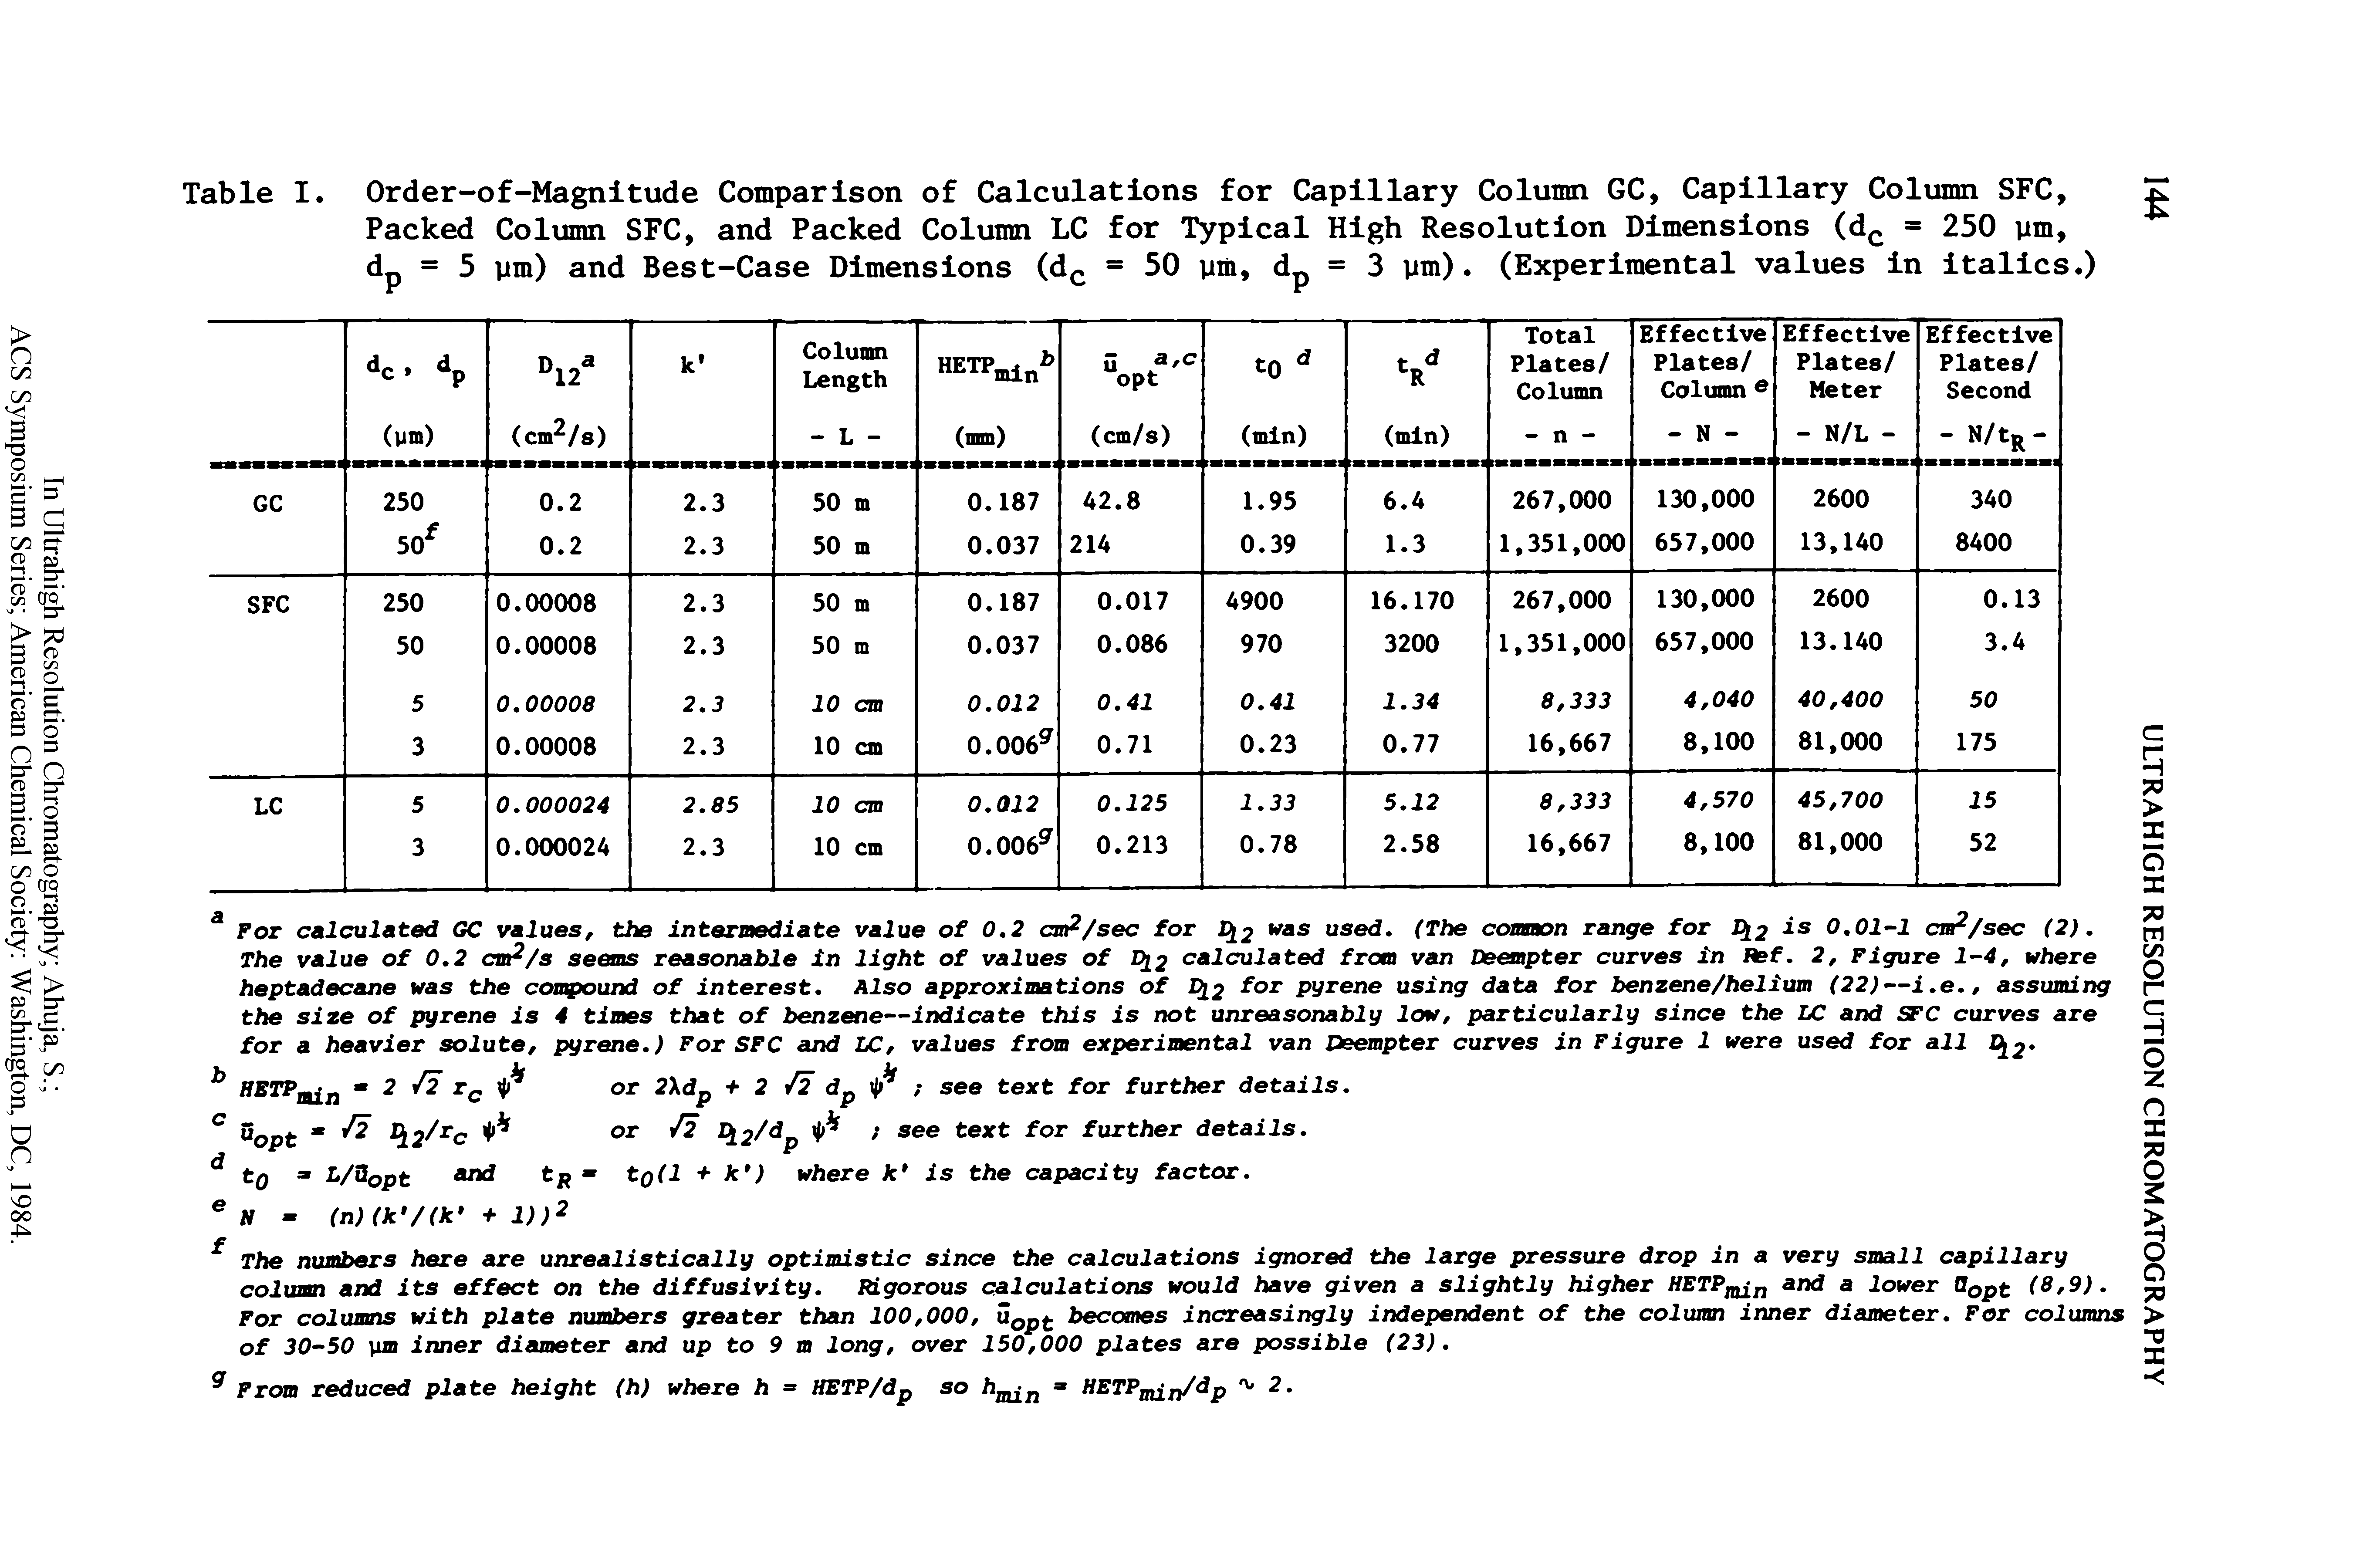 Table I. Order-of-Magnitude Comparison of Calculations for Capillary Column GC, Capillary Column SFC, Packed Column SFC, and Packed Column LC for Typical High Resolution Dimensions (d, = 250 ym, dp = 5 ym) and Best-Case Dimensions (d = 50 ym, dp = 3 ym). (Experimental values In Italics.)...